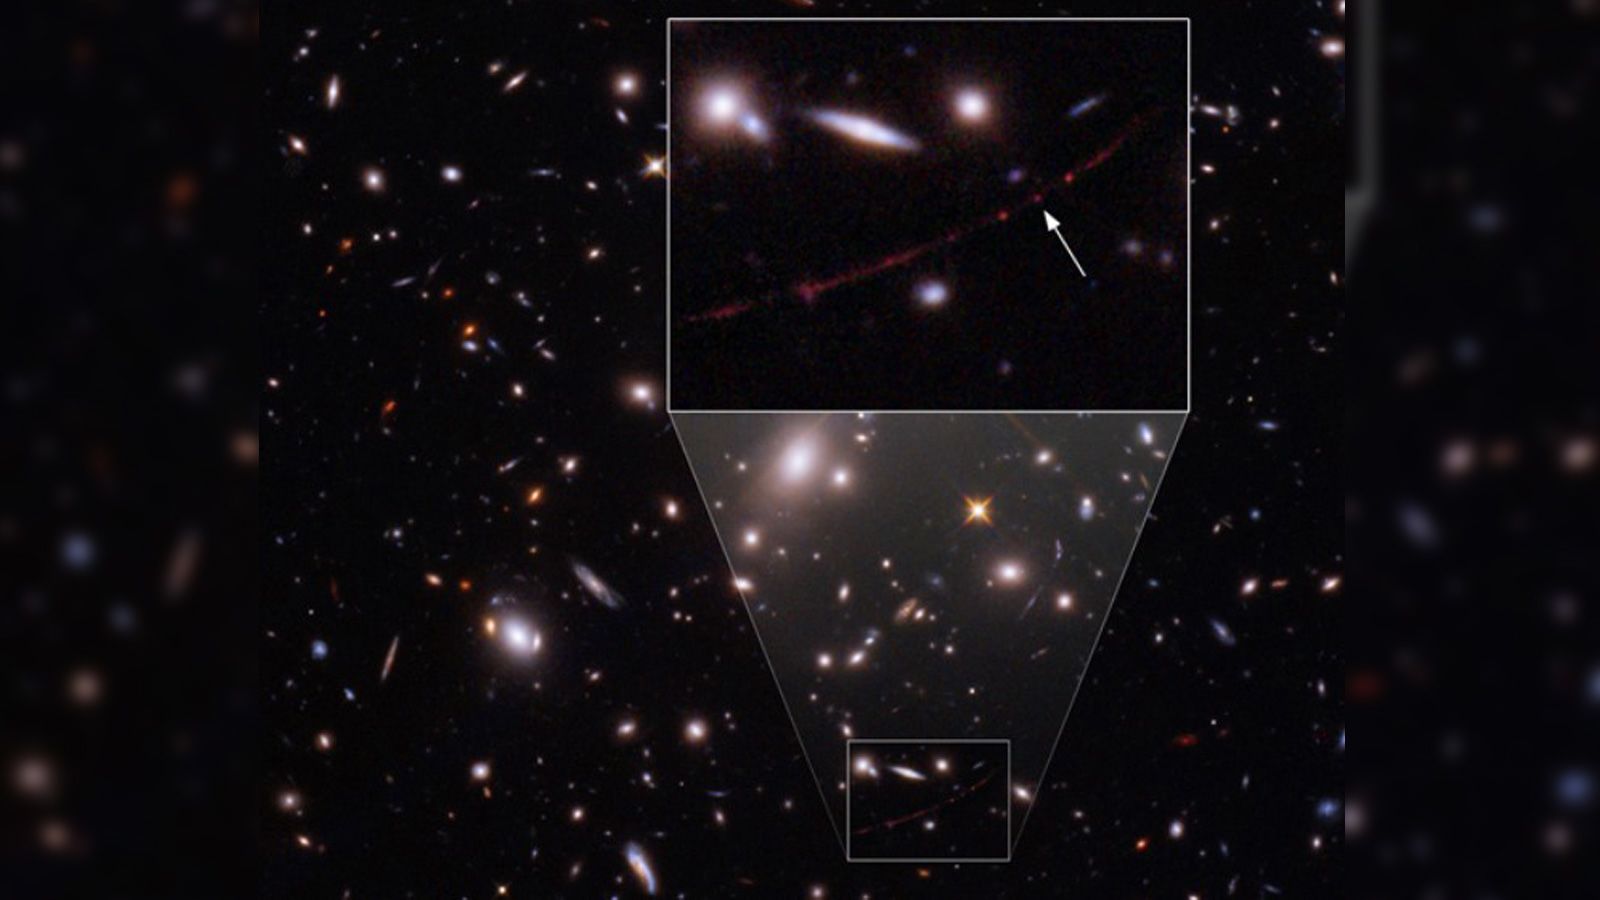 Earendel star: Space Telescope sees most distant star ever, 28 billion light-years away |